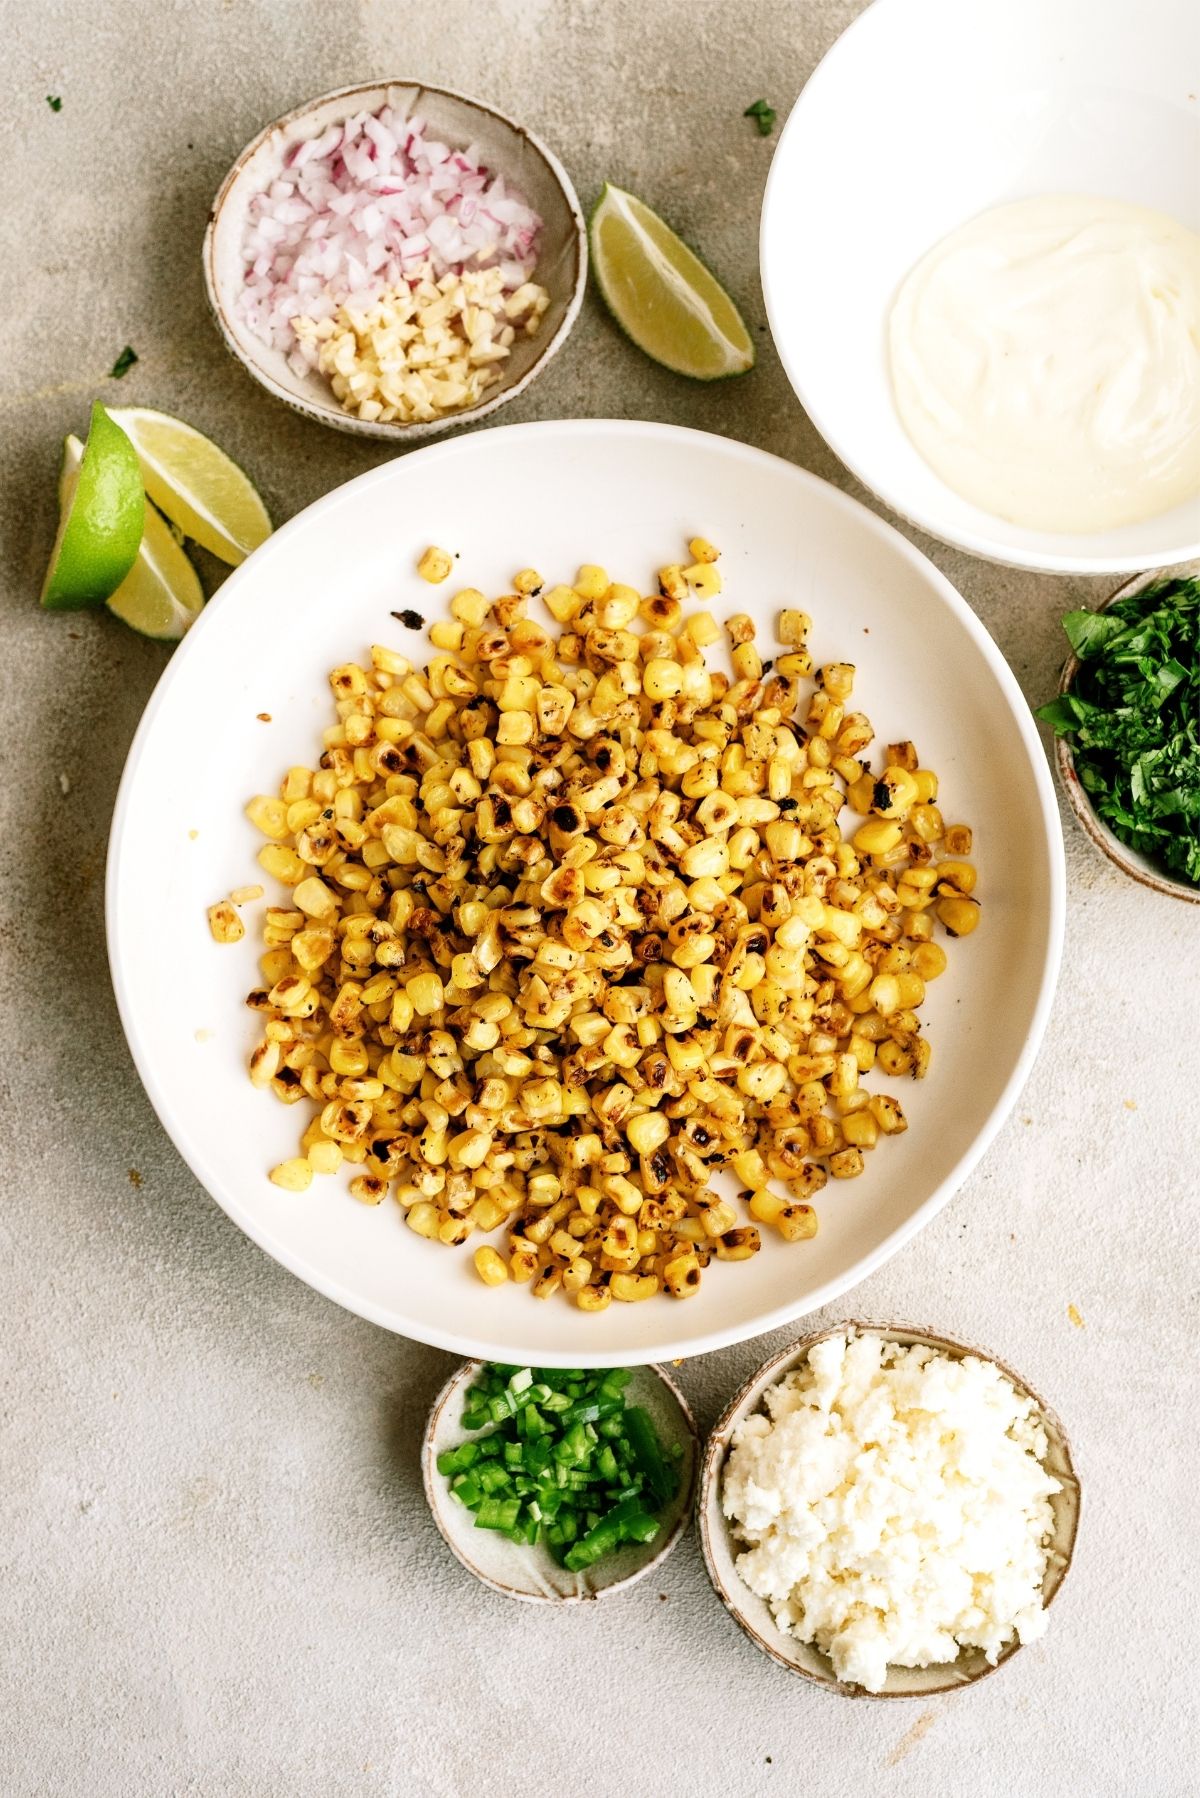 Ingredients needed to make Mexican Street Corn